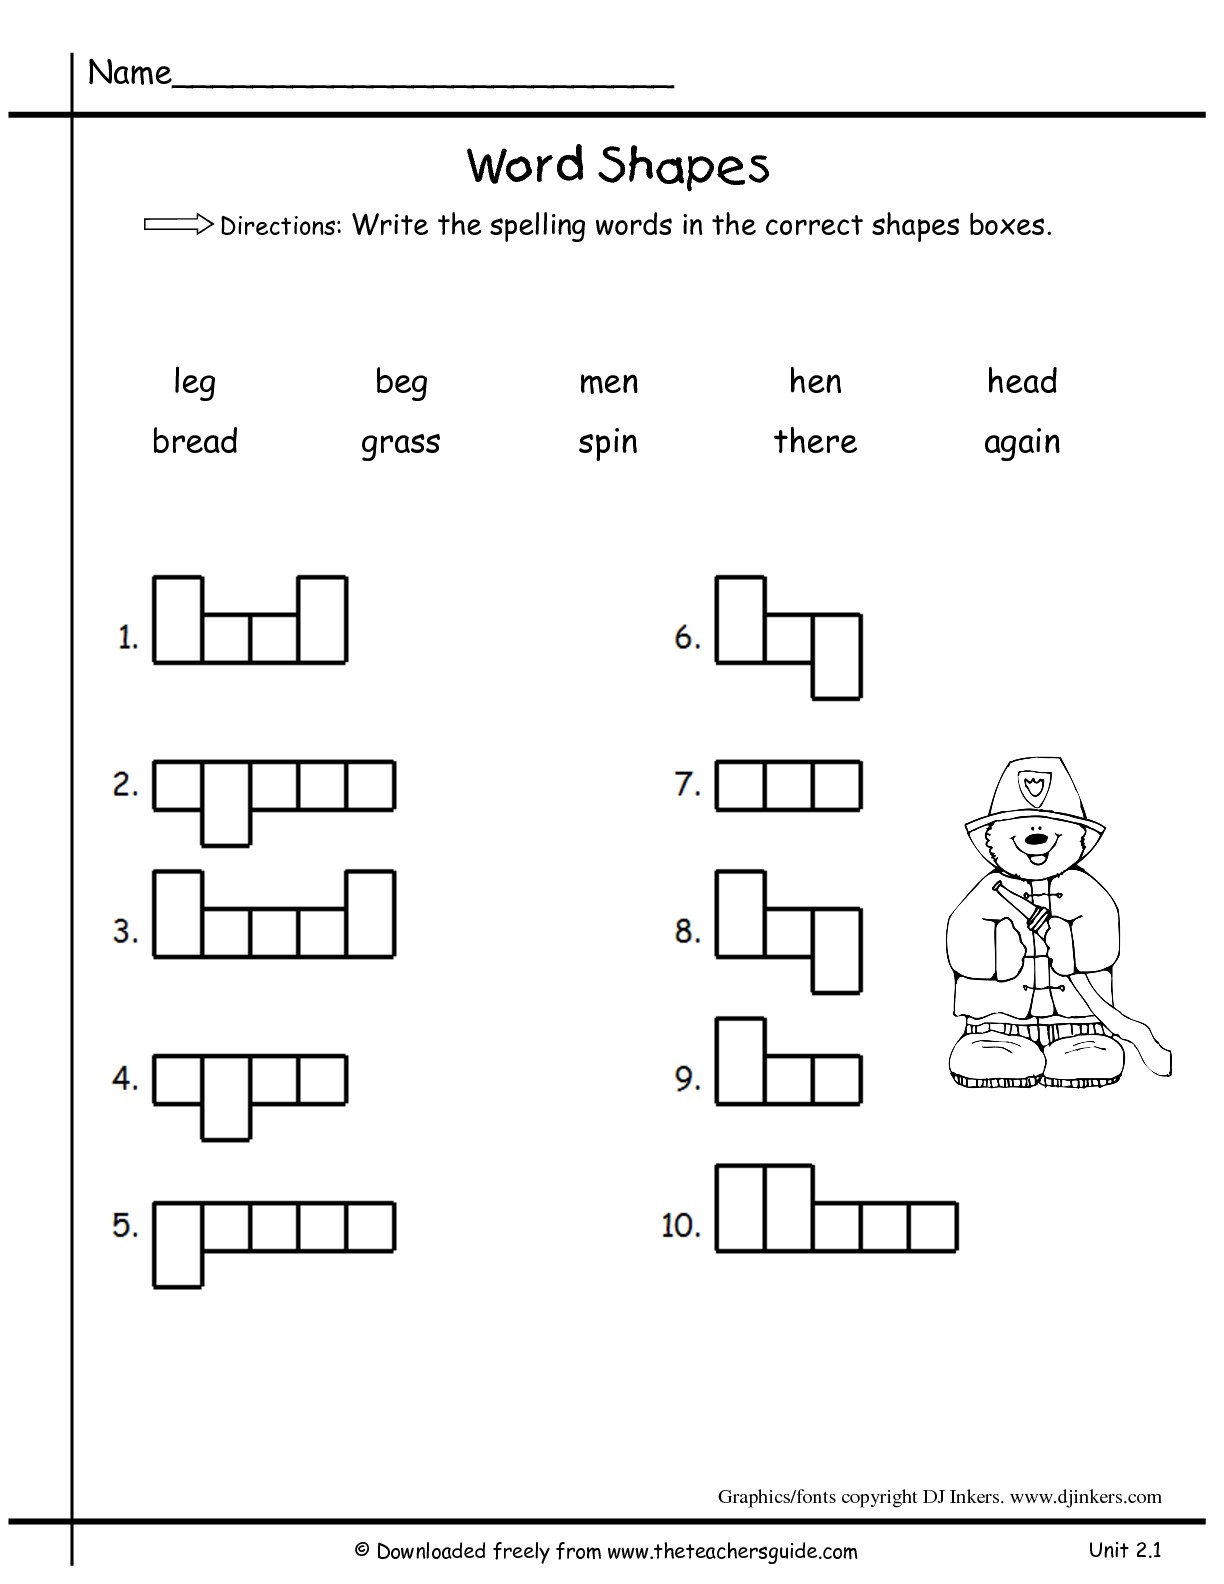 freebie-friday-roll-and-spell-printable-spelling-word-practice